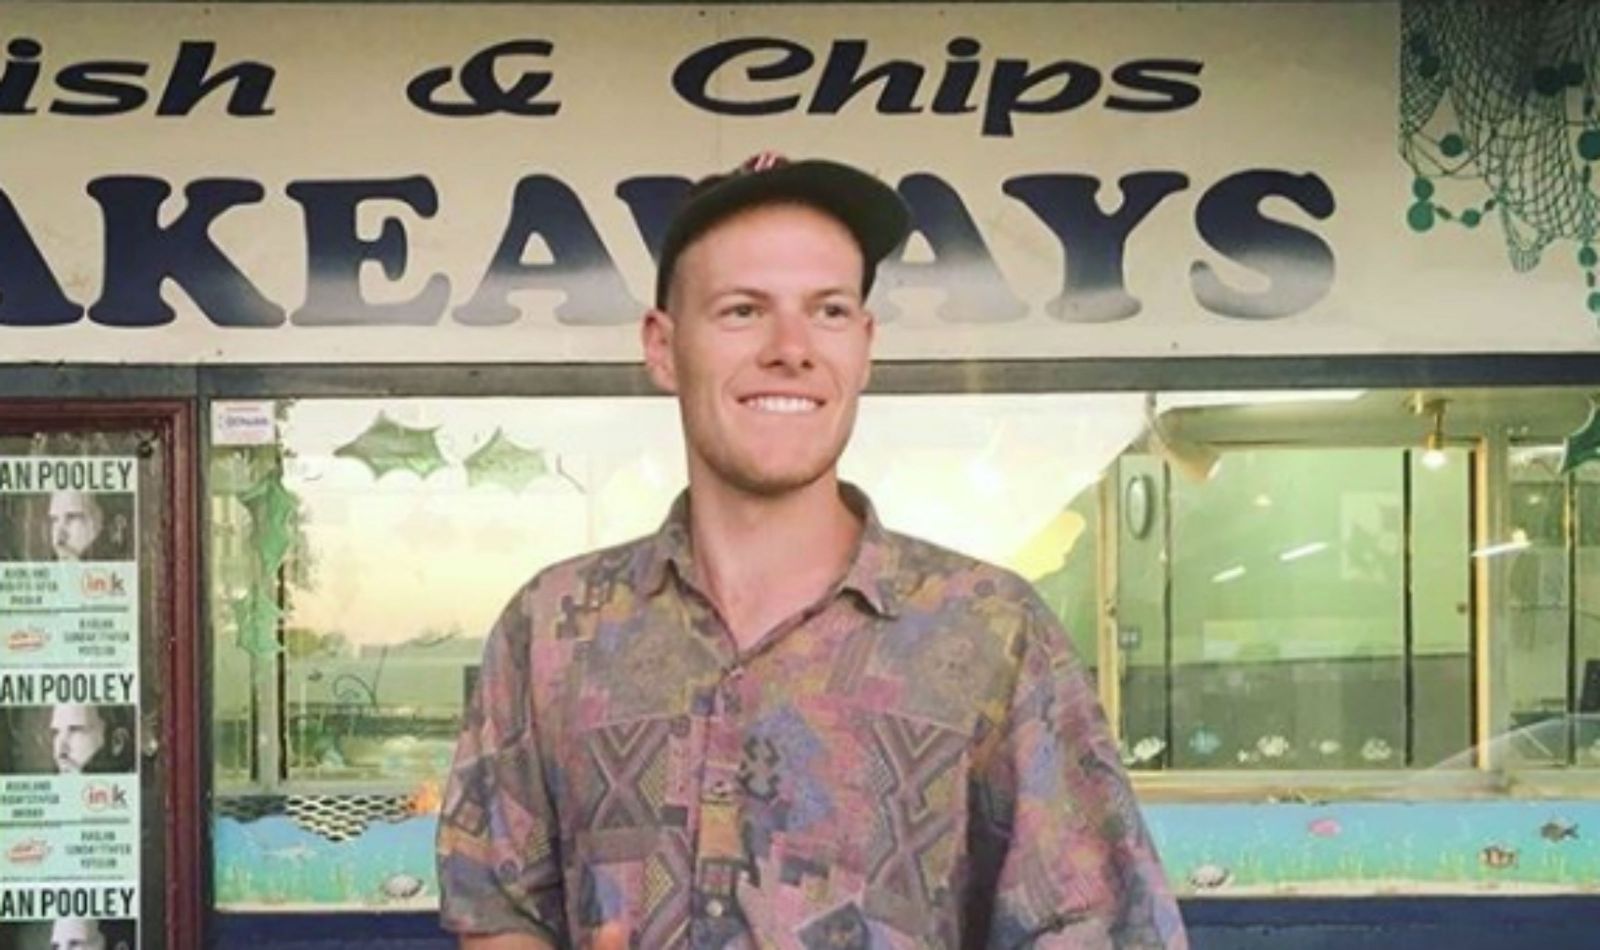 Cory Champion stands outside a fish and chip shop.